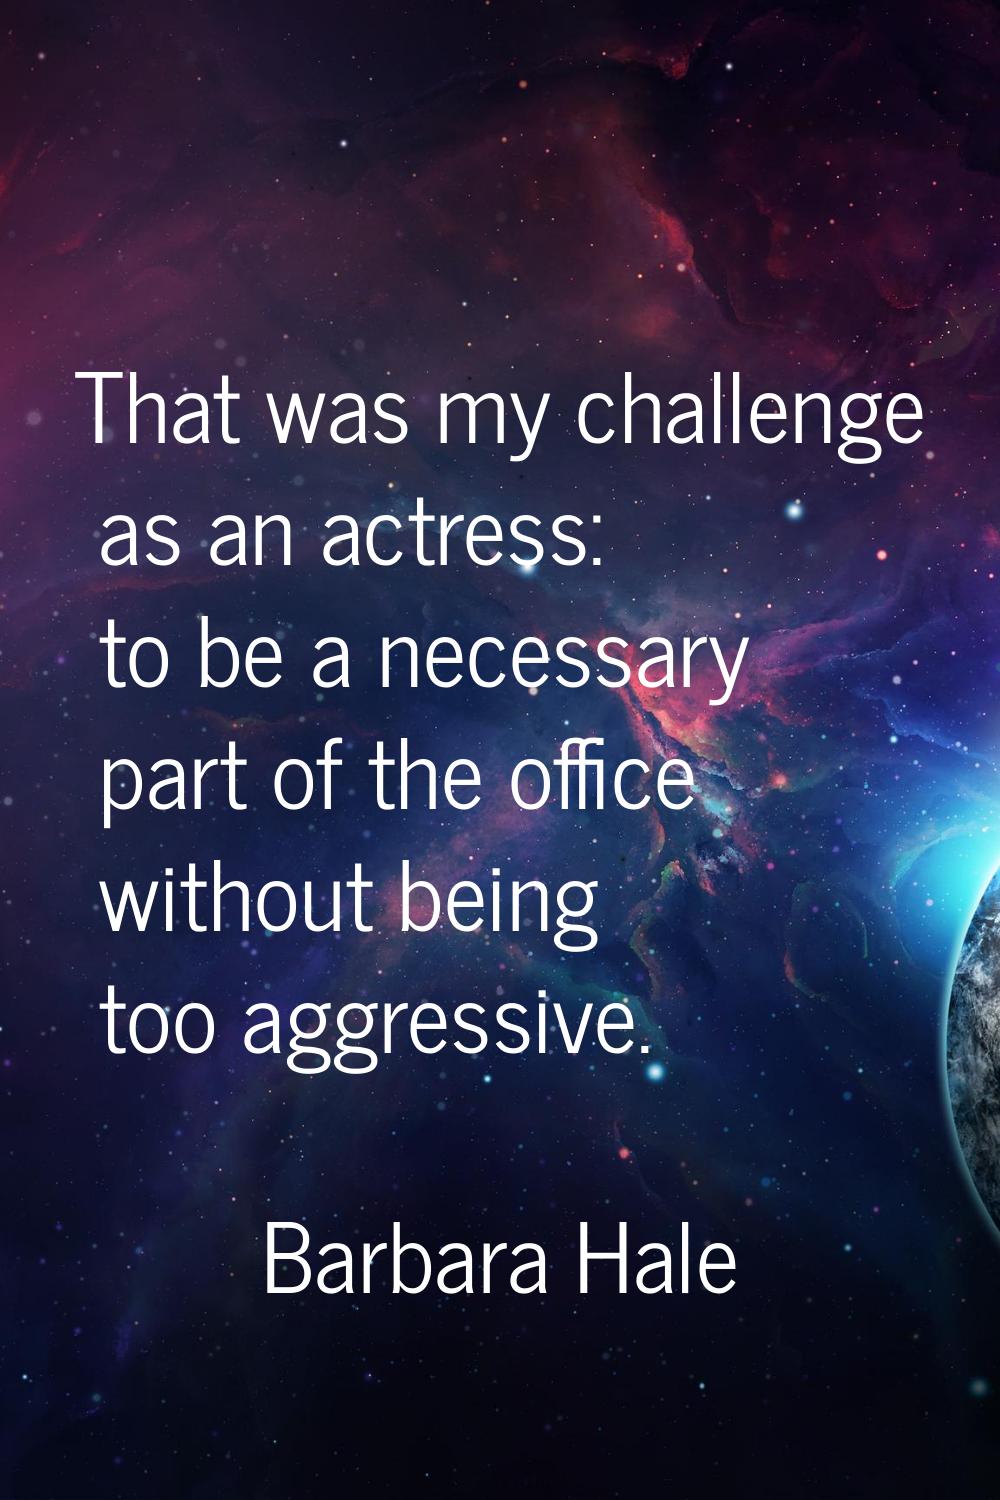 That was my challenge as an actress: to be a necessary part of the office without being too aggress